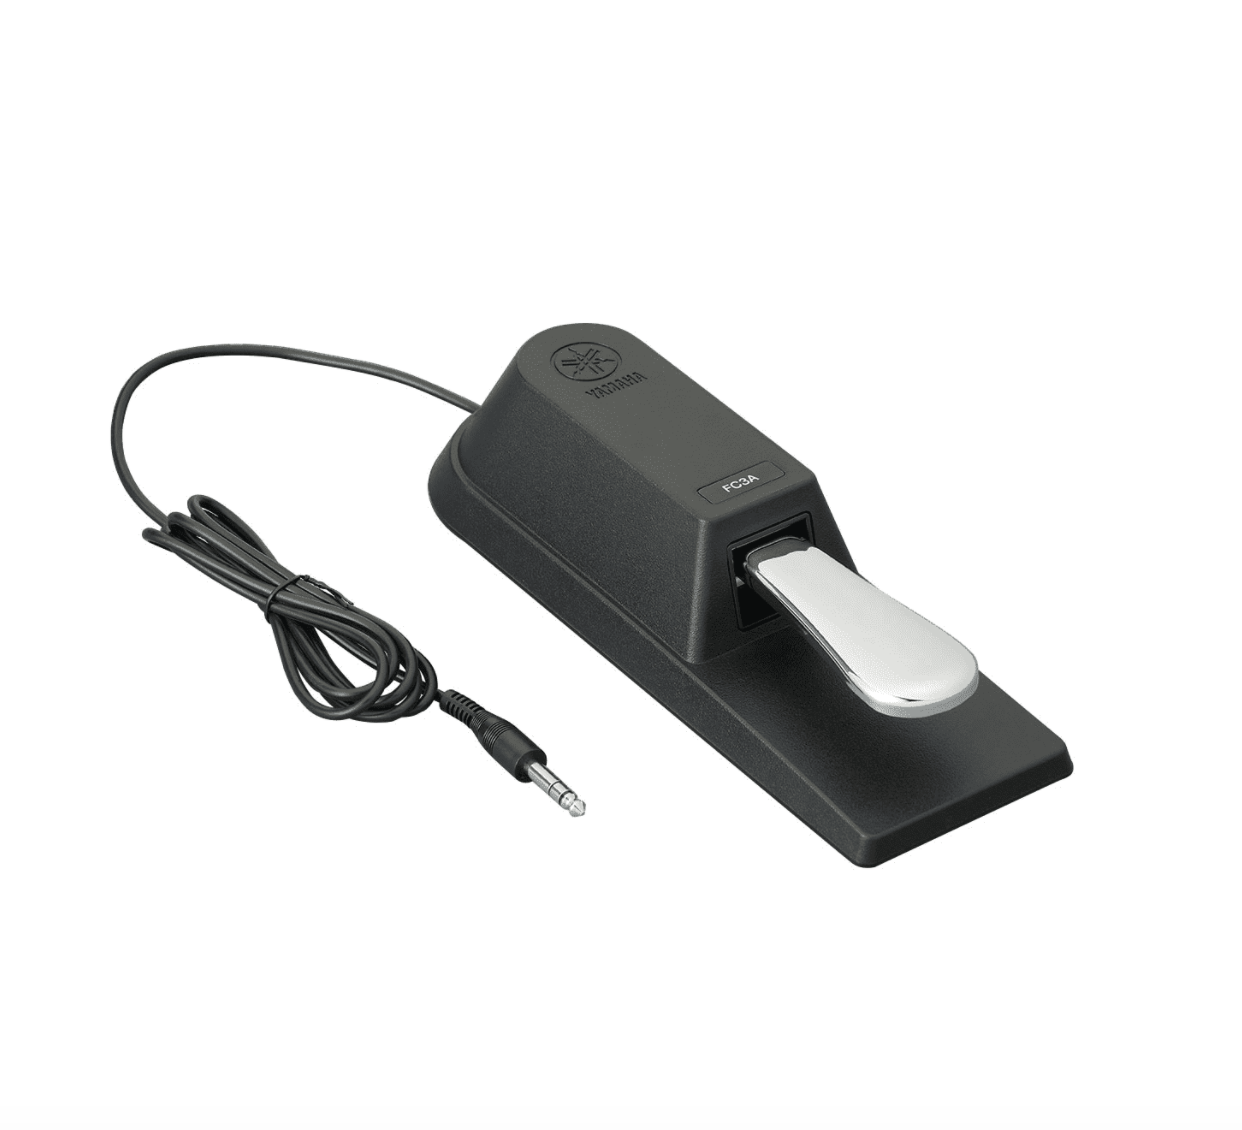 Yamaha FC3A Continuous Piano-Style Sustain Pedal